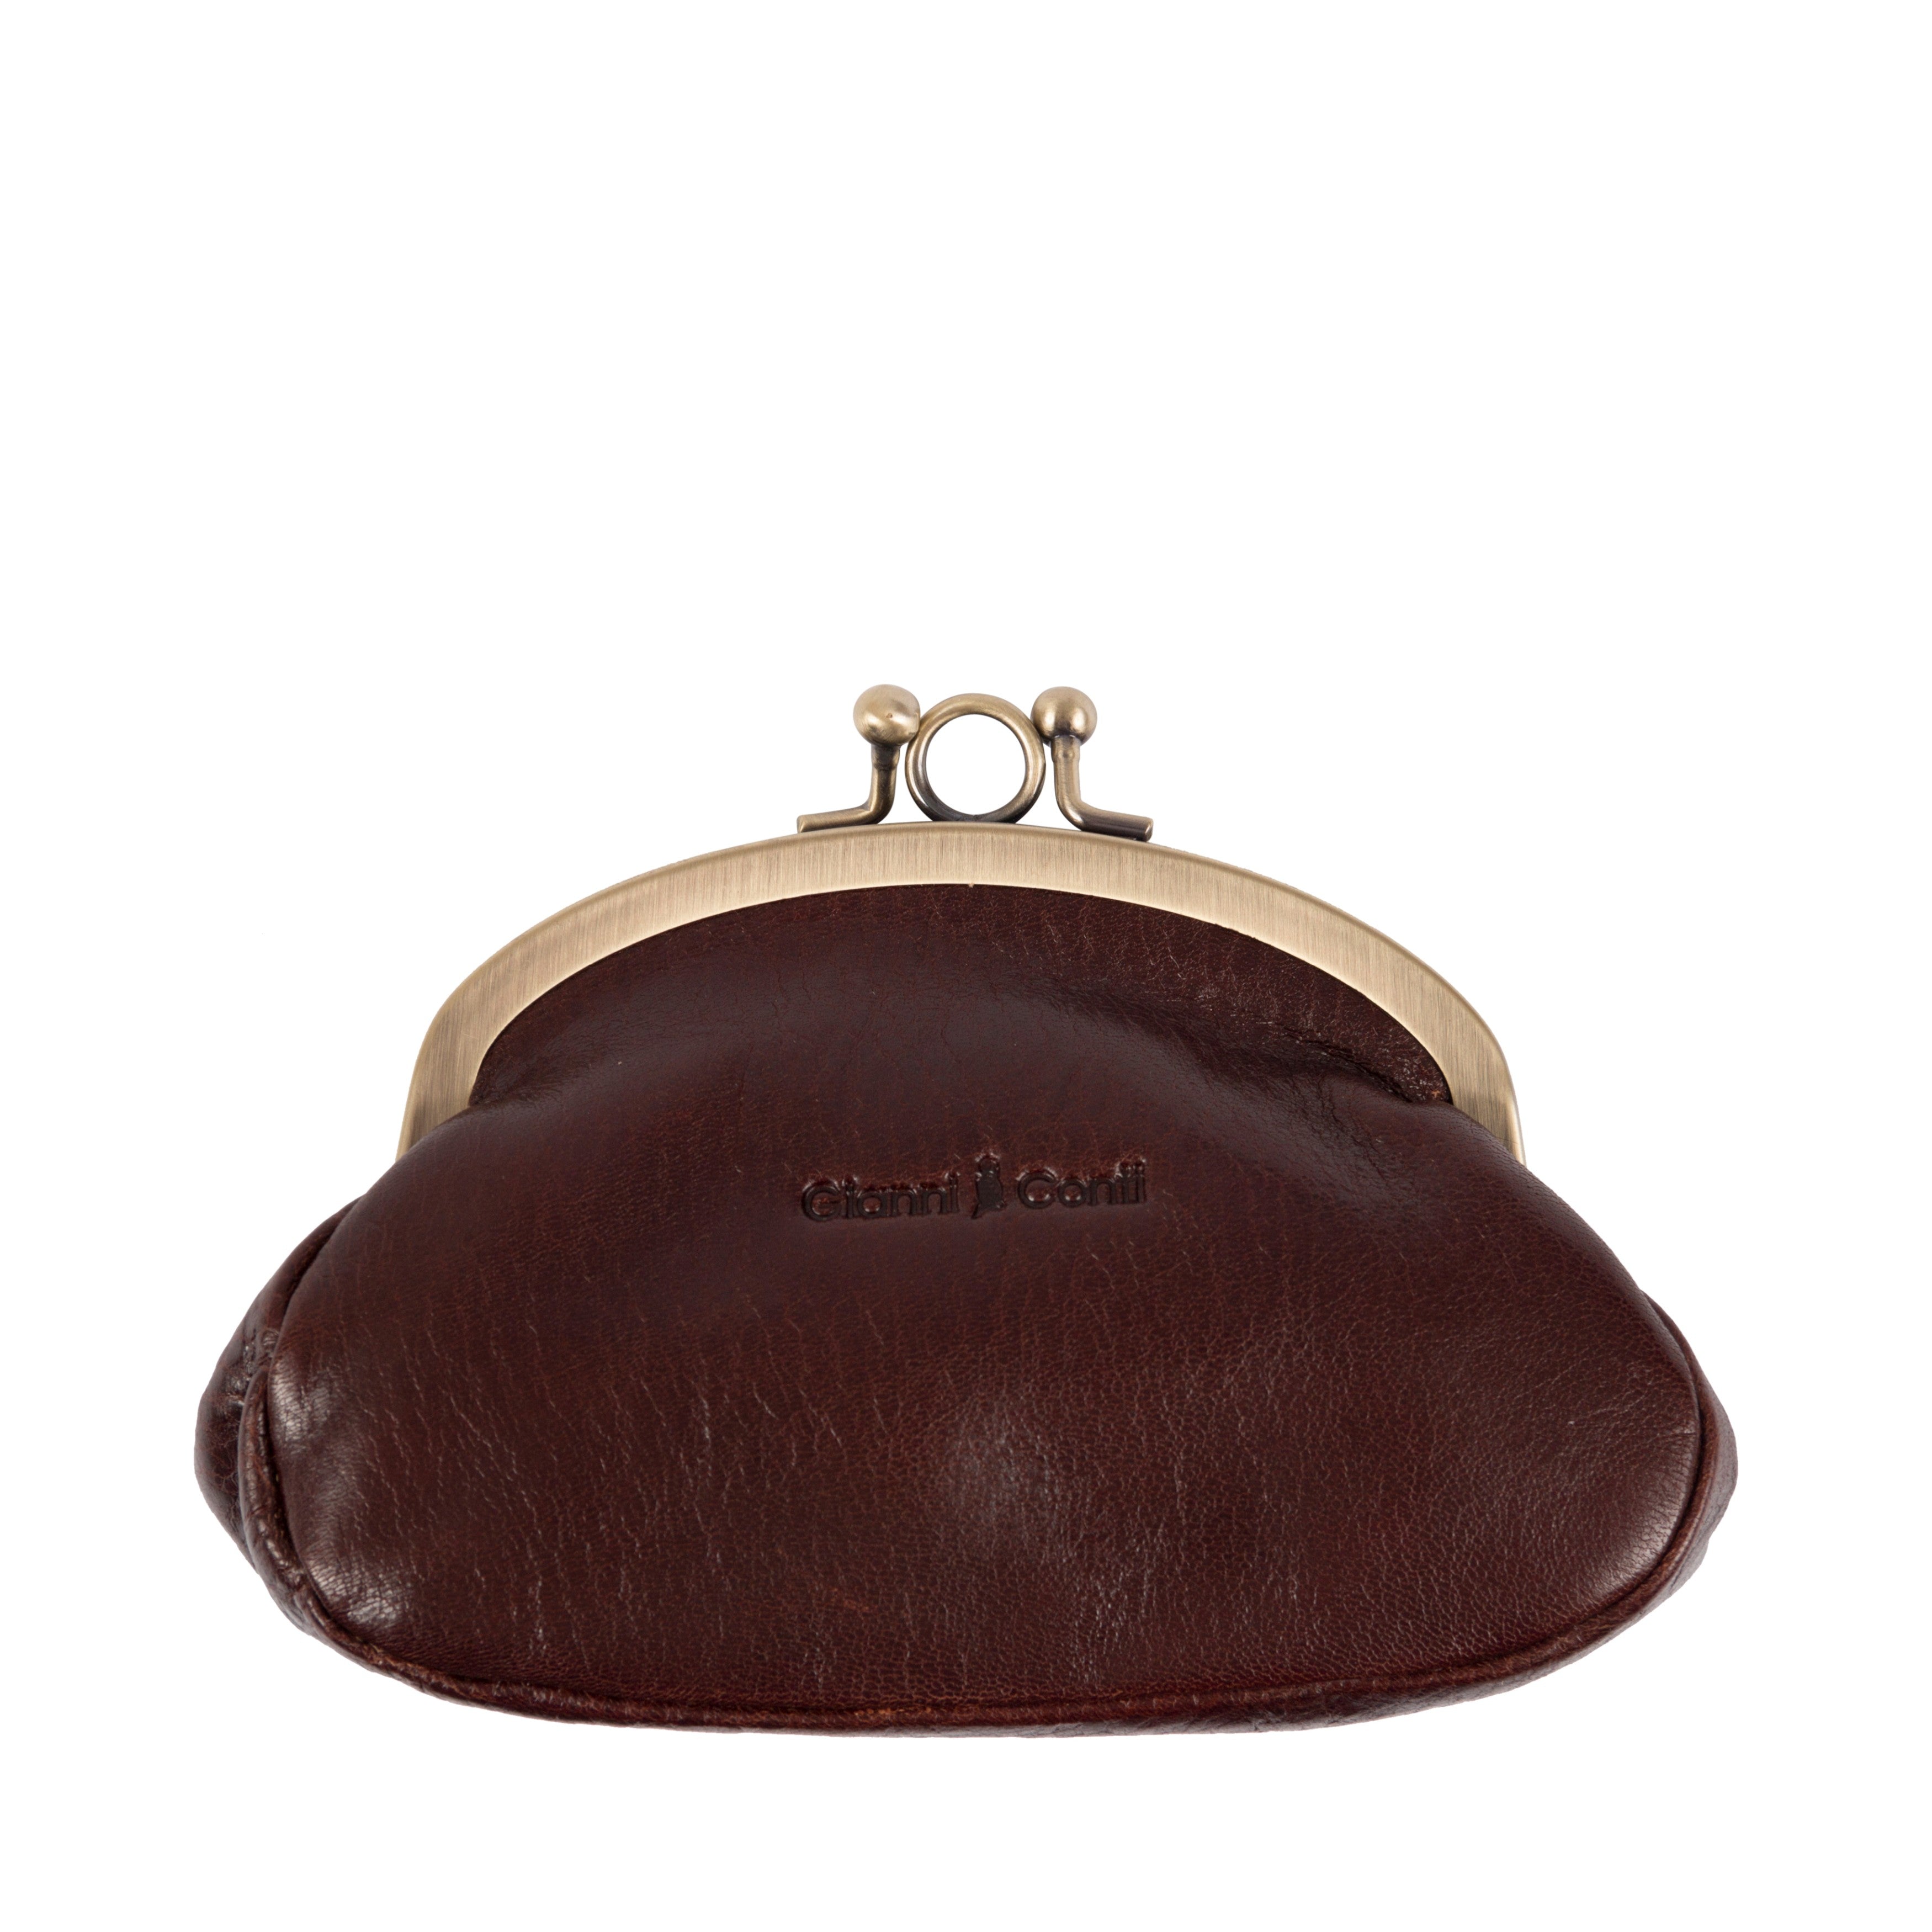 Gianni Conti Maria Vegetable-Tanned Leather Coin Purse